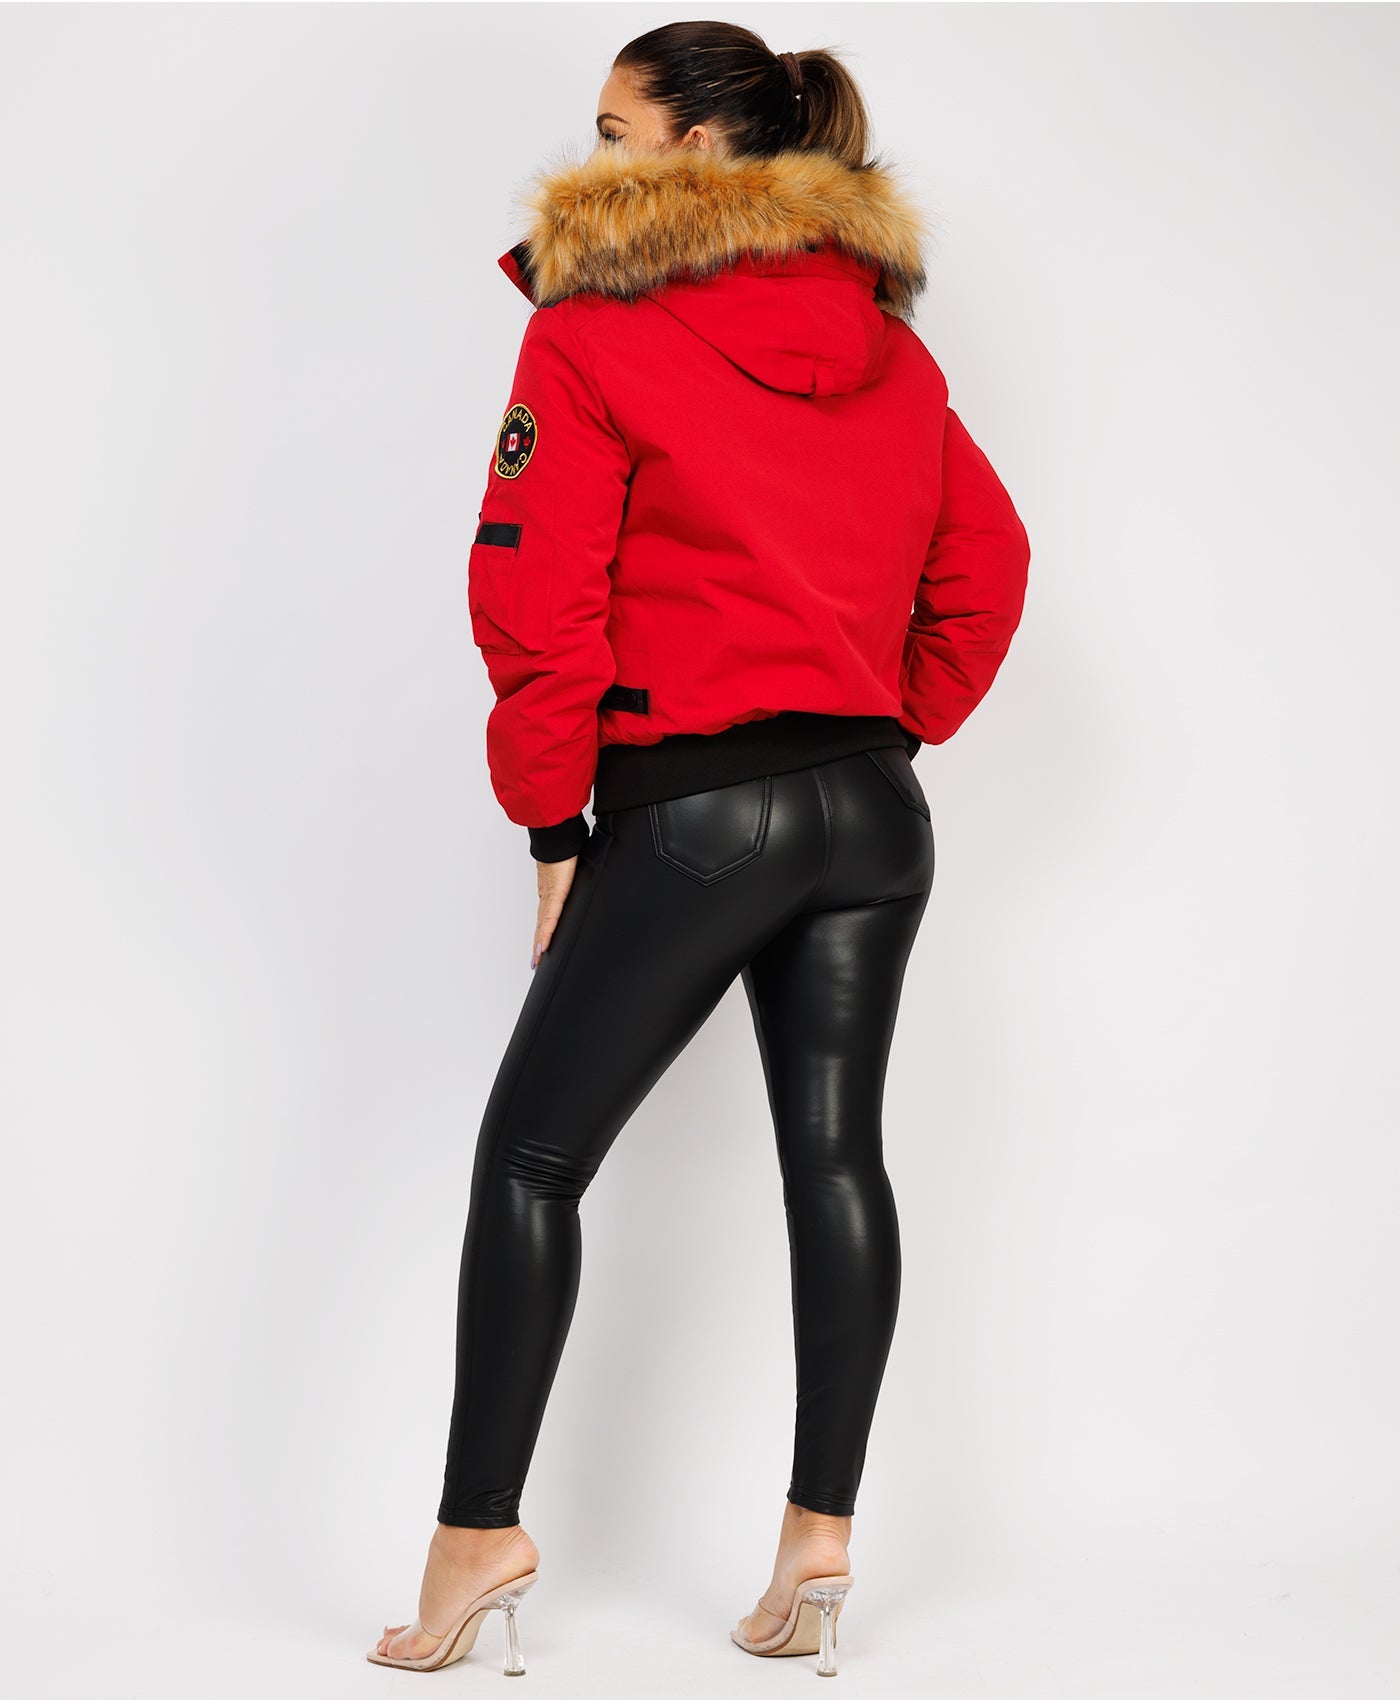 Canada-Bomber-Jacket-With-Fur-Hood-Red-1